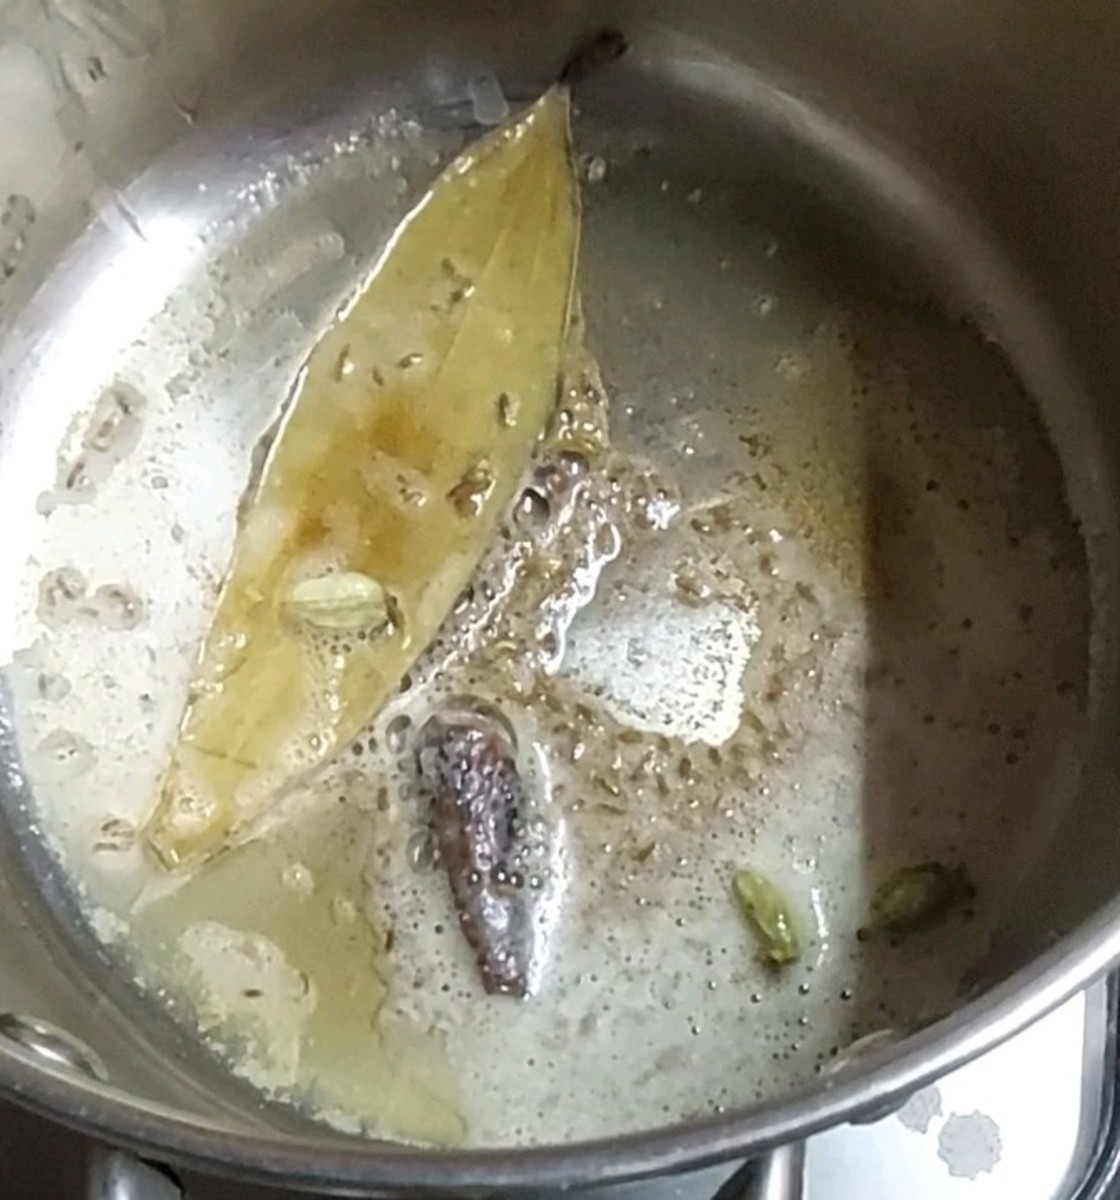 In a pan heat 2 tablespoons of butter and 1 tablespoon ghee or clarified butter. Splutter 1 teaspoon cumin seeds. Add 1-2 bay leaves, 1-inch long cinnamon stick, 1-2 cloves and 1-2 cardamom pods, Fry for 1 minute.